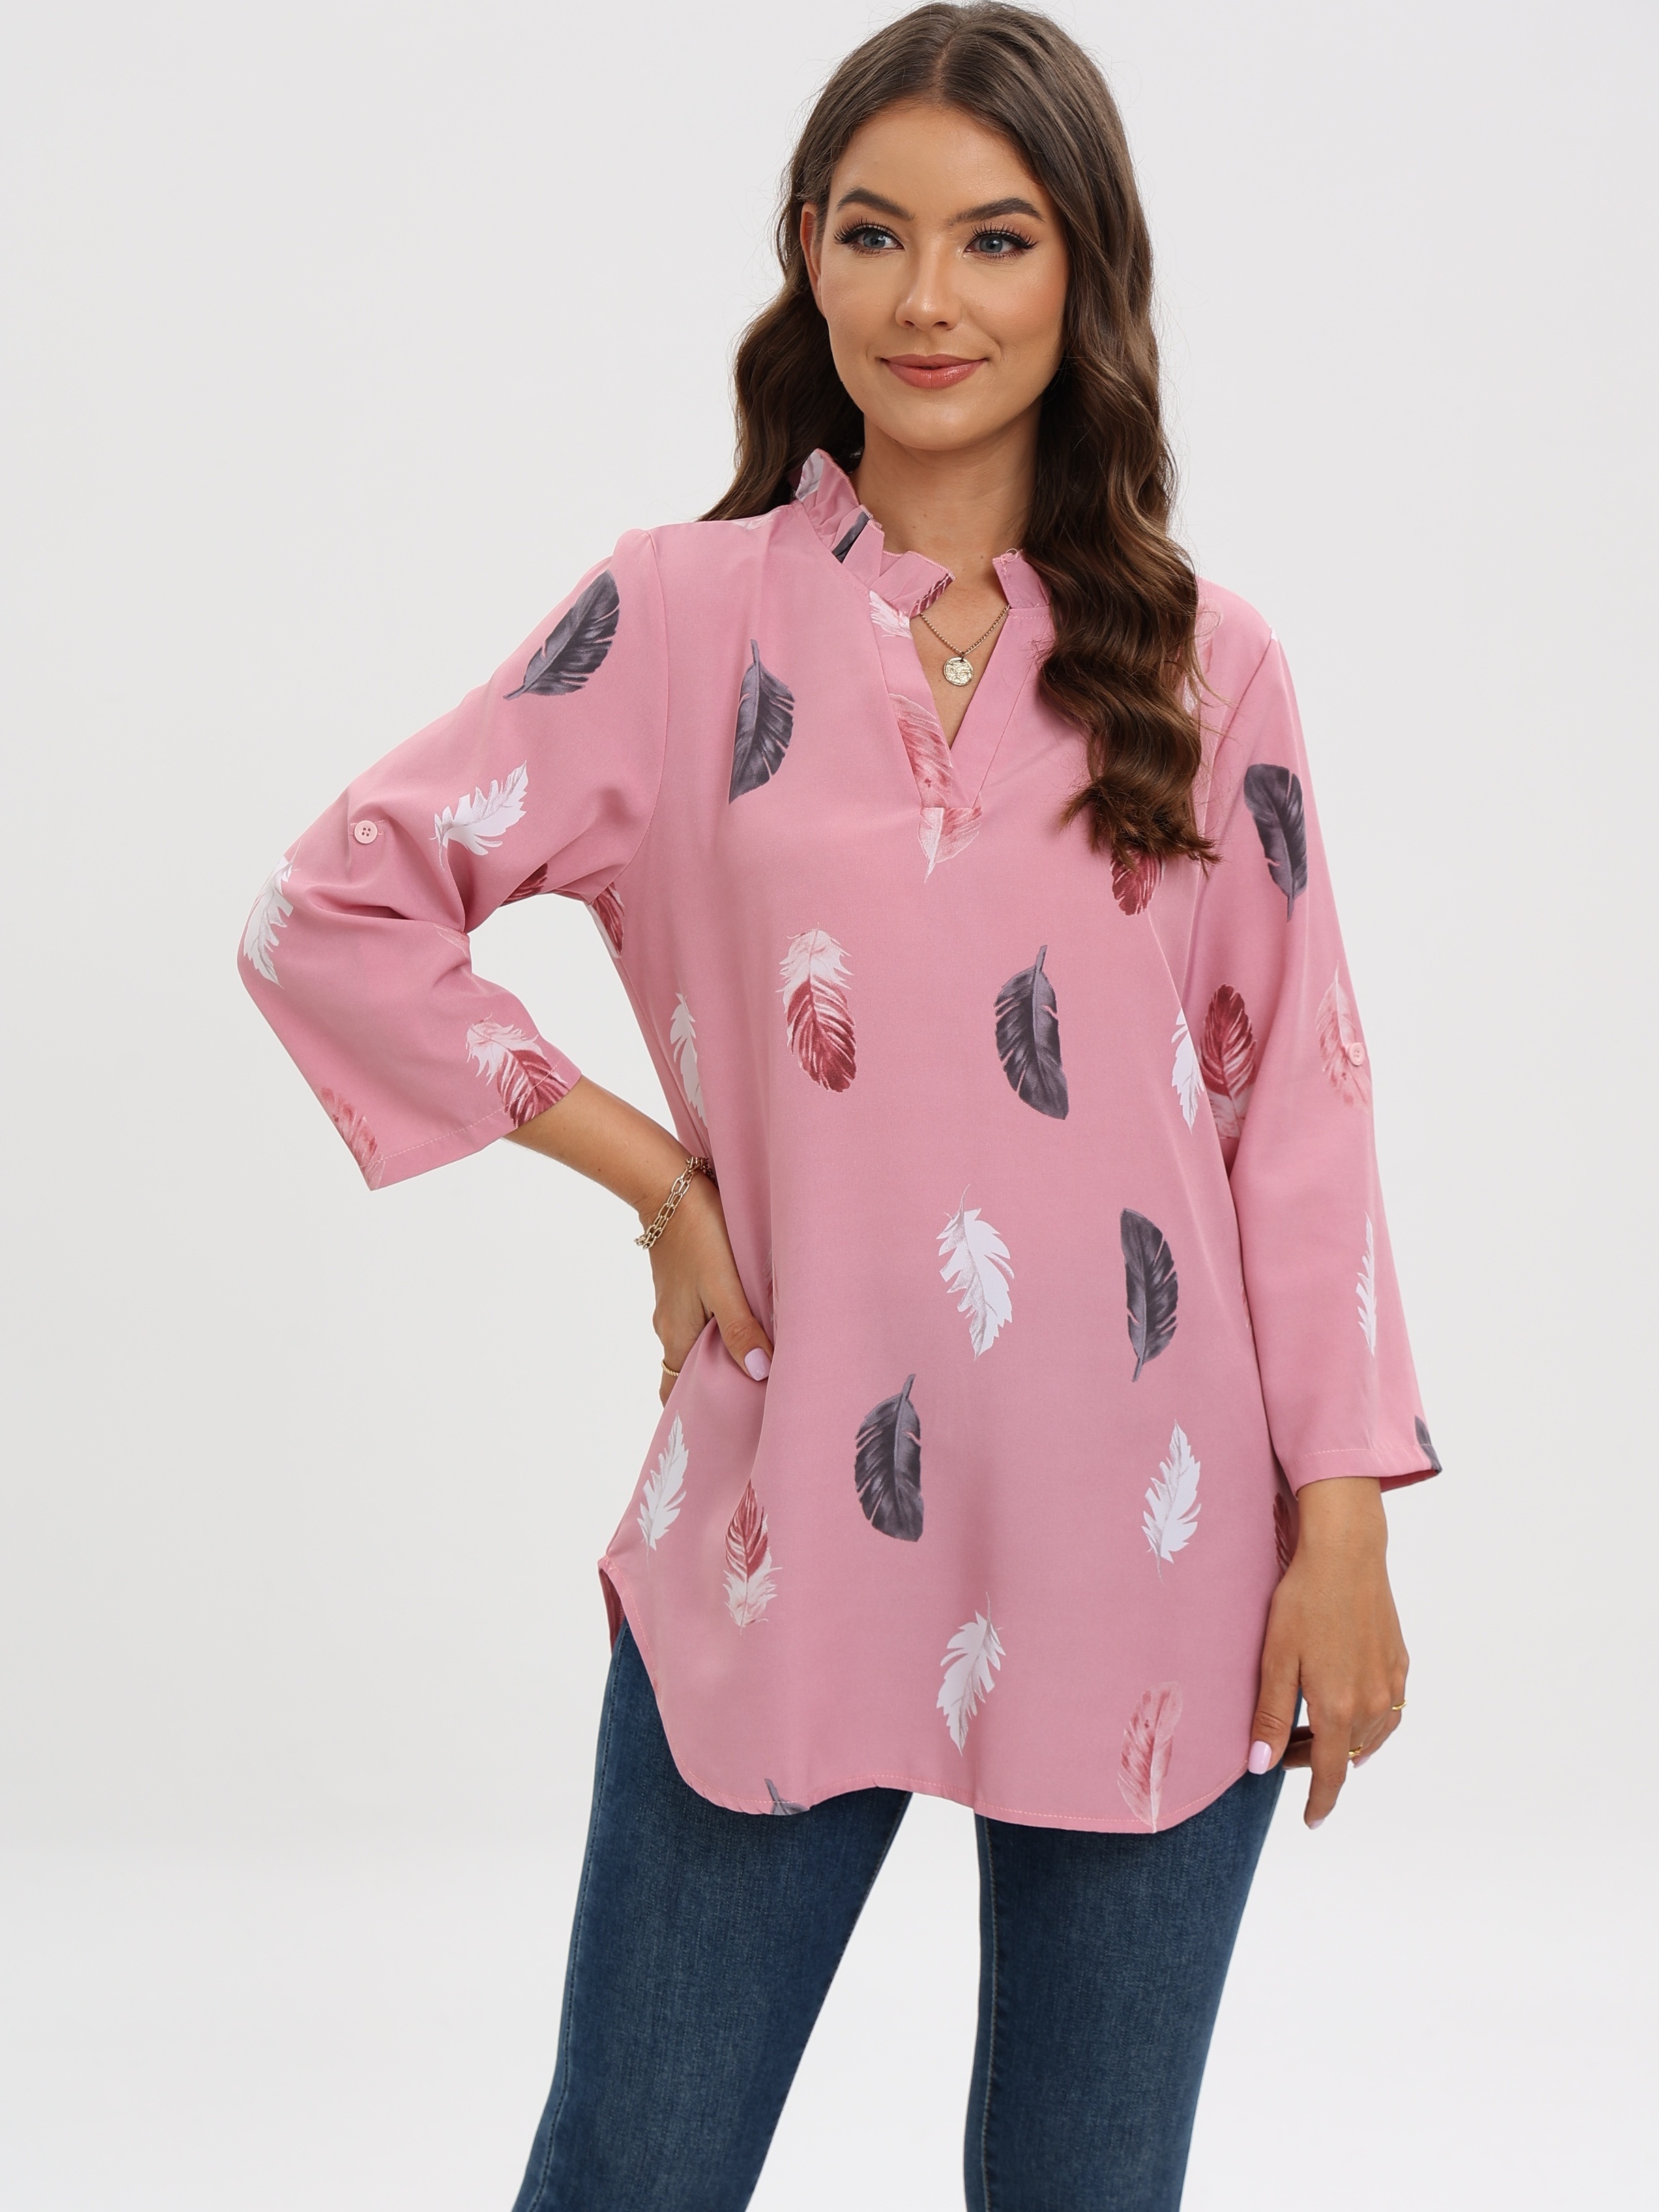 Quarter Zip up V-Neck Feather Graphic Tunic Tops to Wear with